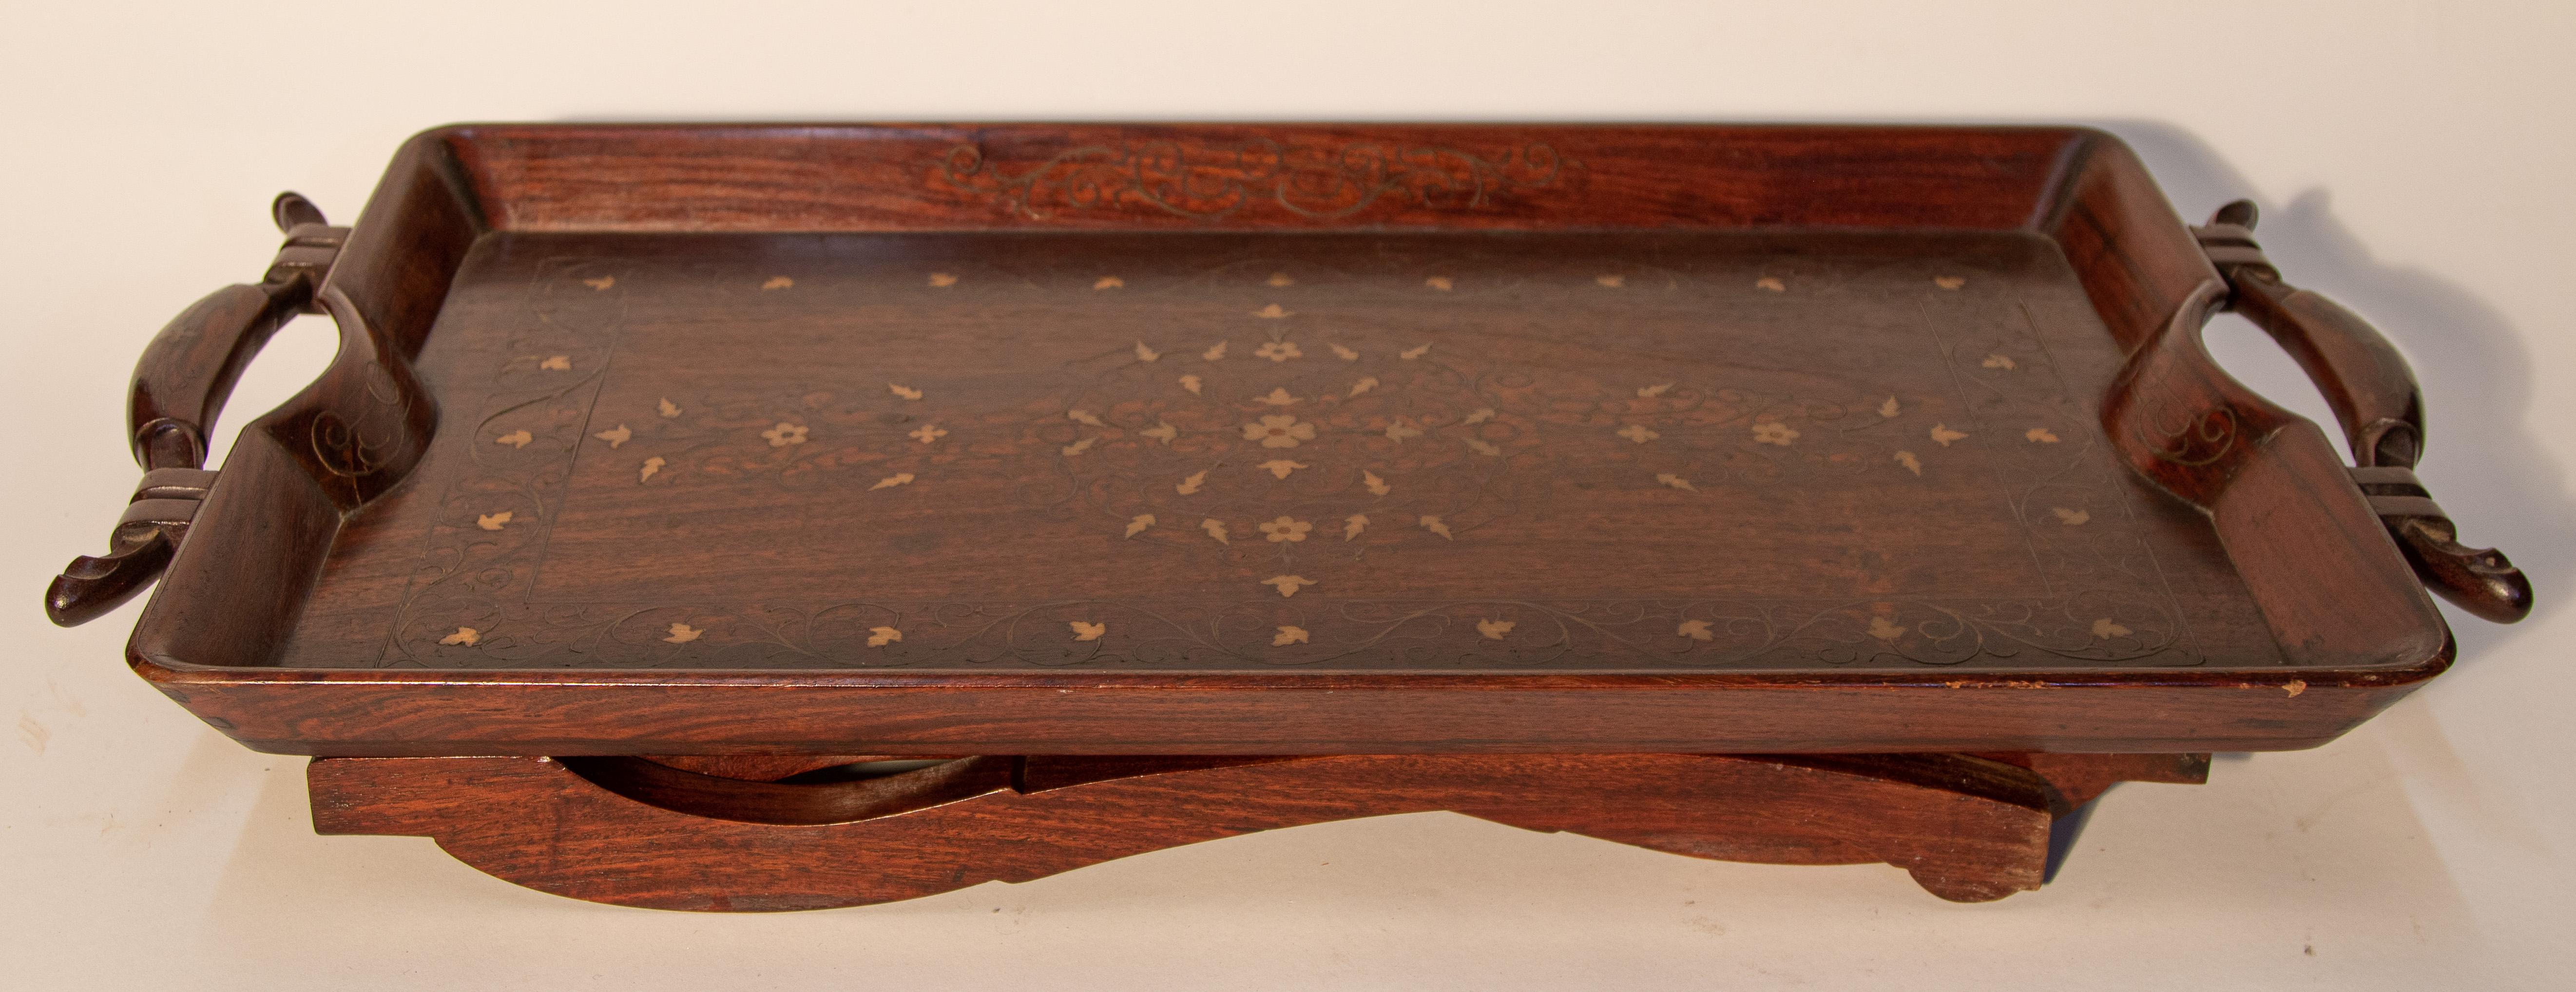 Vintage Anglo-Indian Inlaid Tray Table For Sale 6